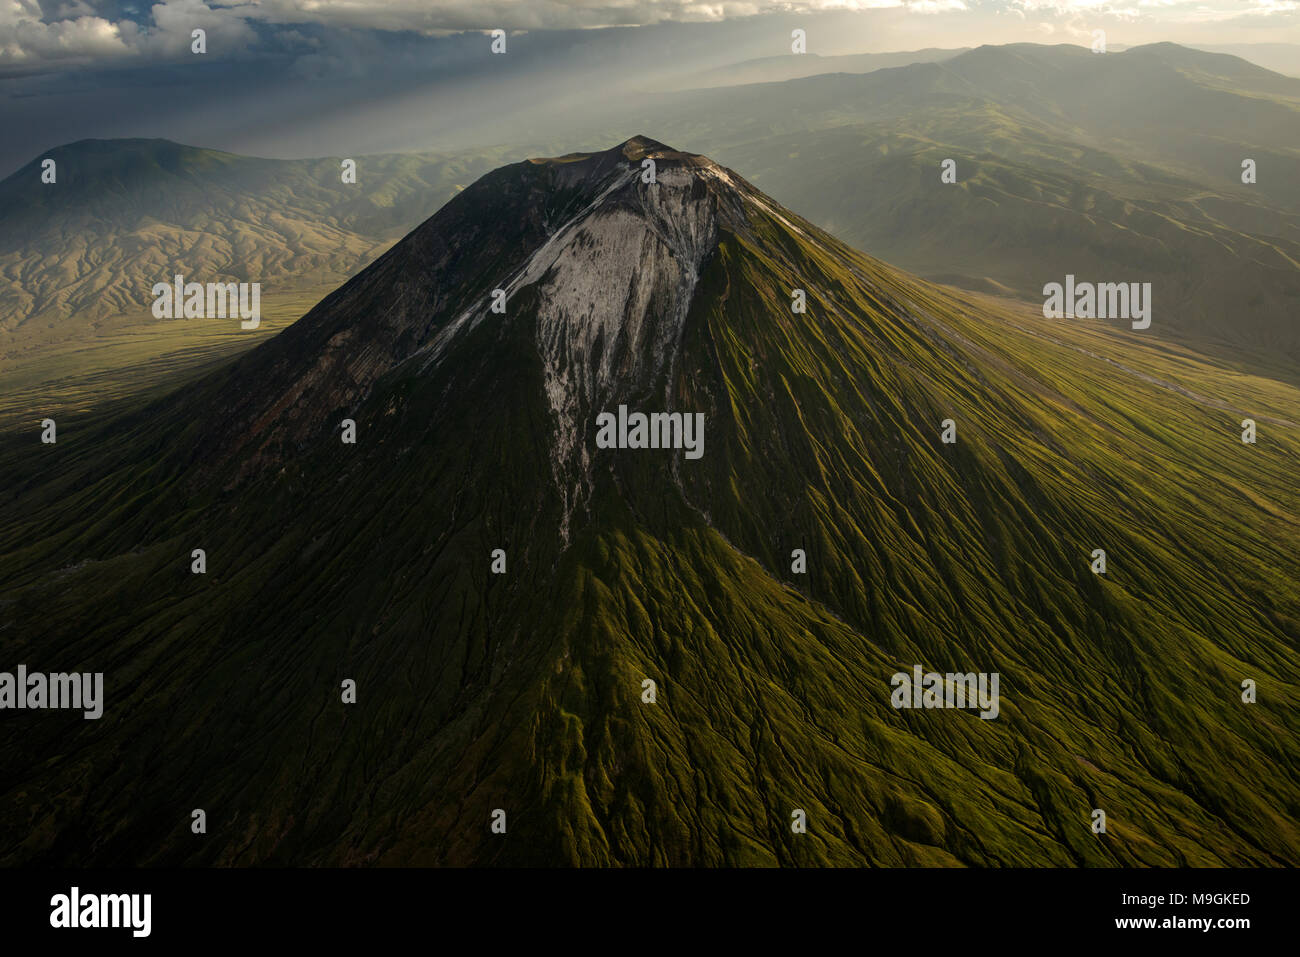 Close up aerial view of the Ol'Doinyo Lengai volcano in Tanzania, Africa. Stock Photo